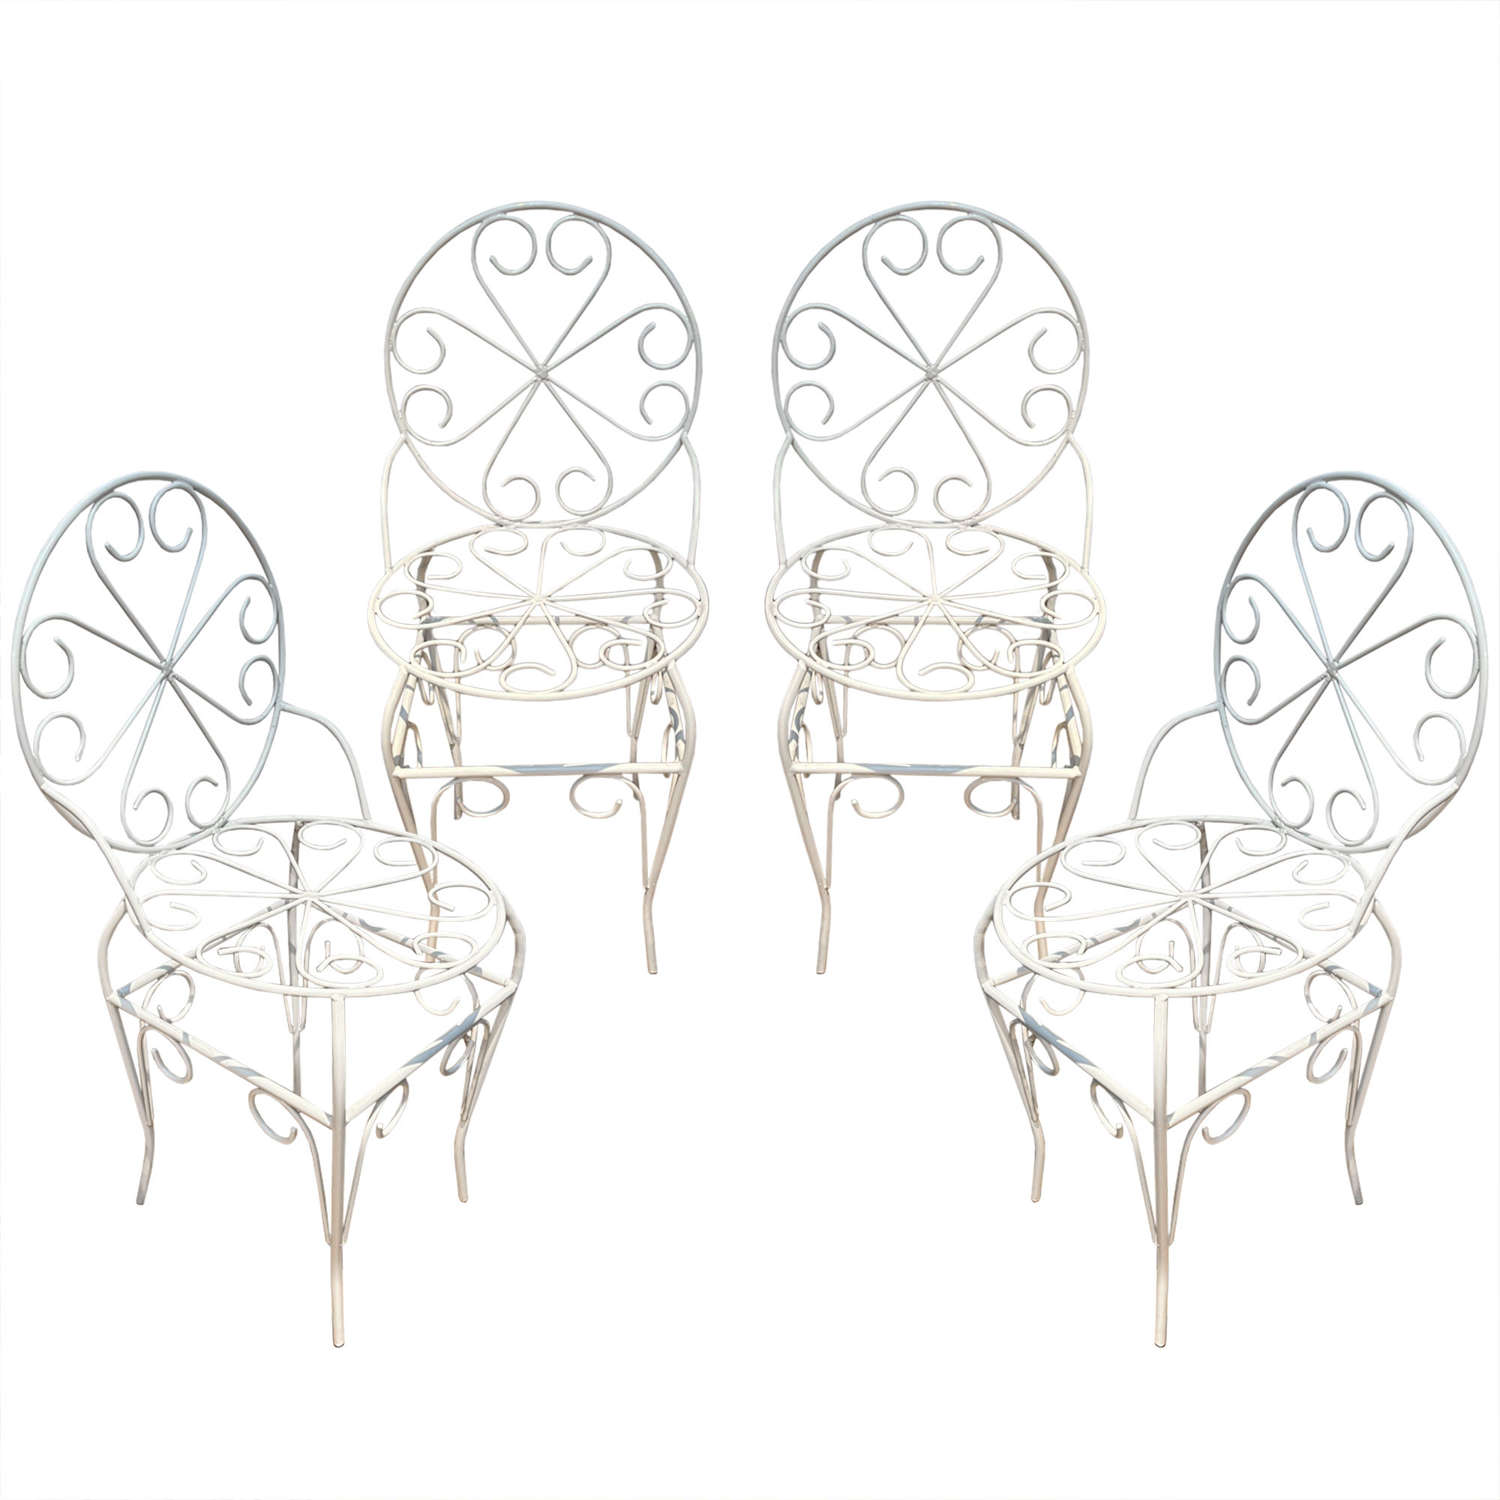 Set of 4 French 1950s Decorative Garden Chairs (5 Available)